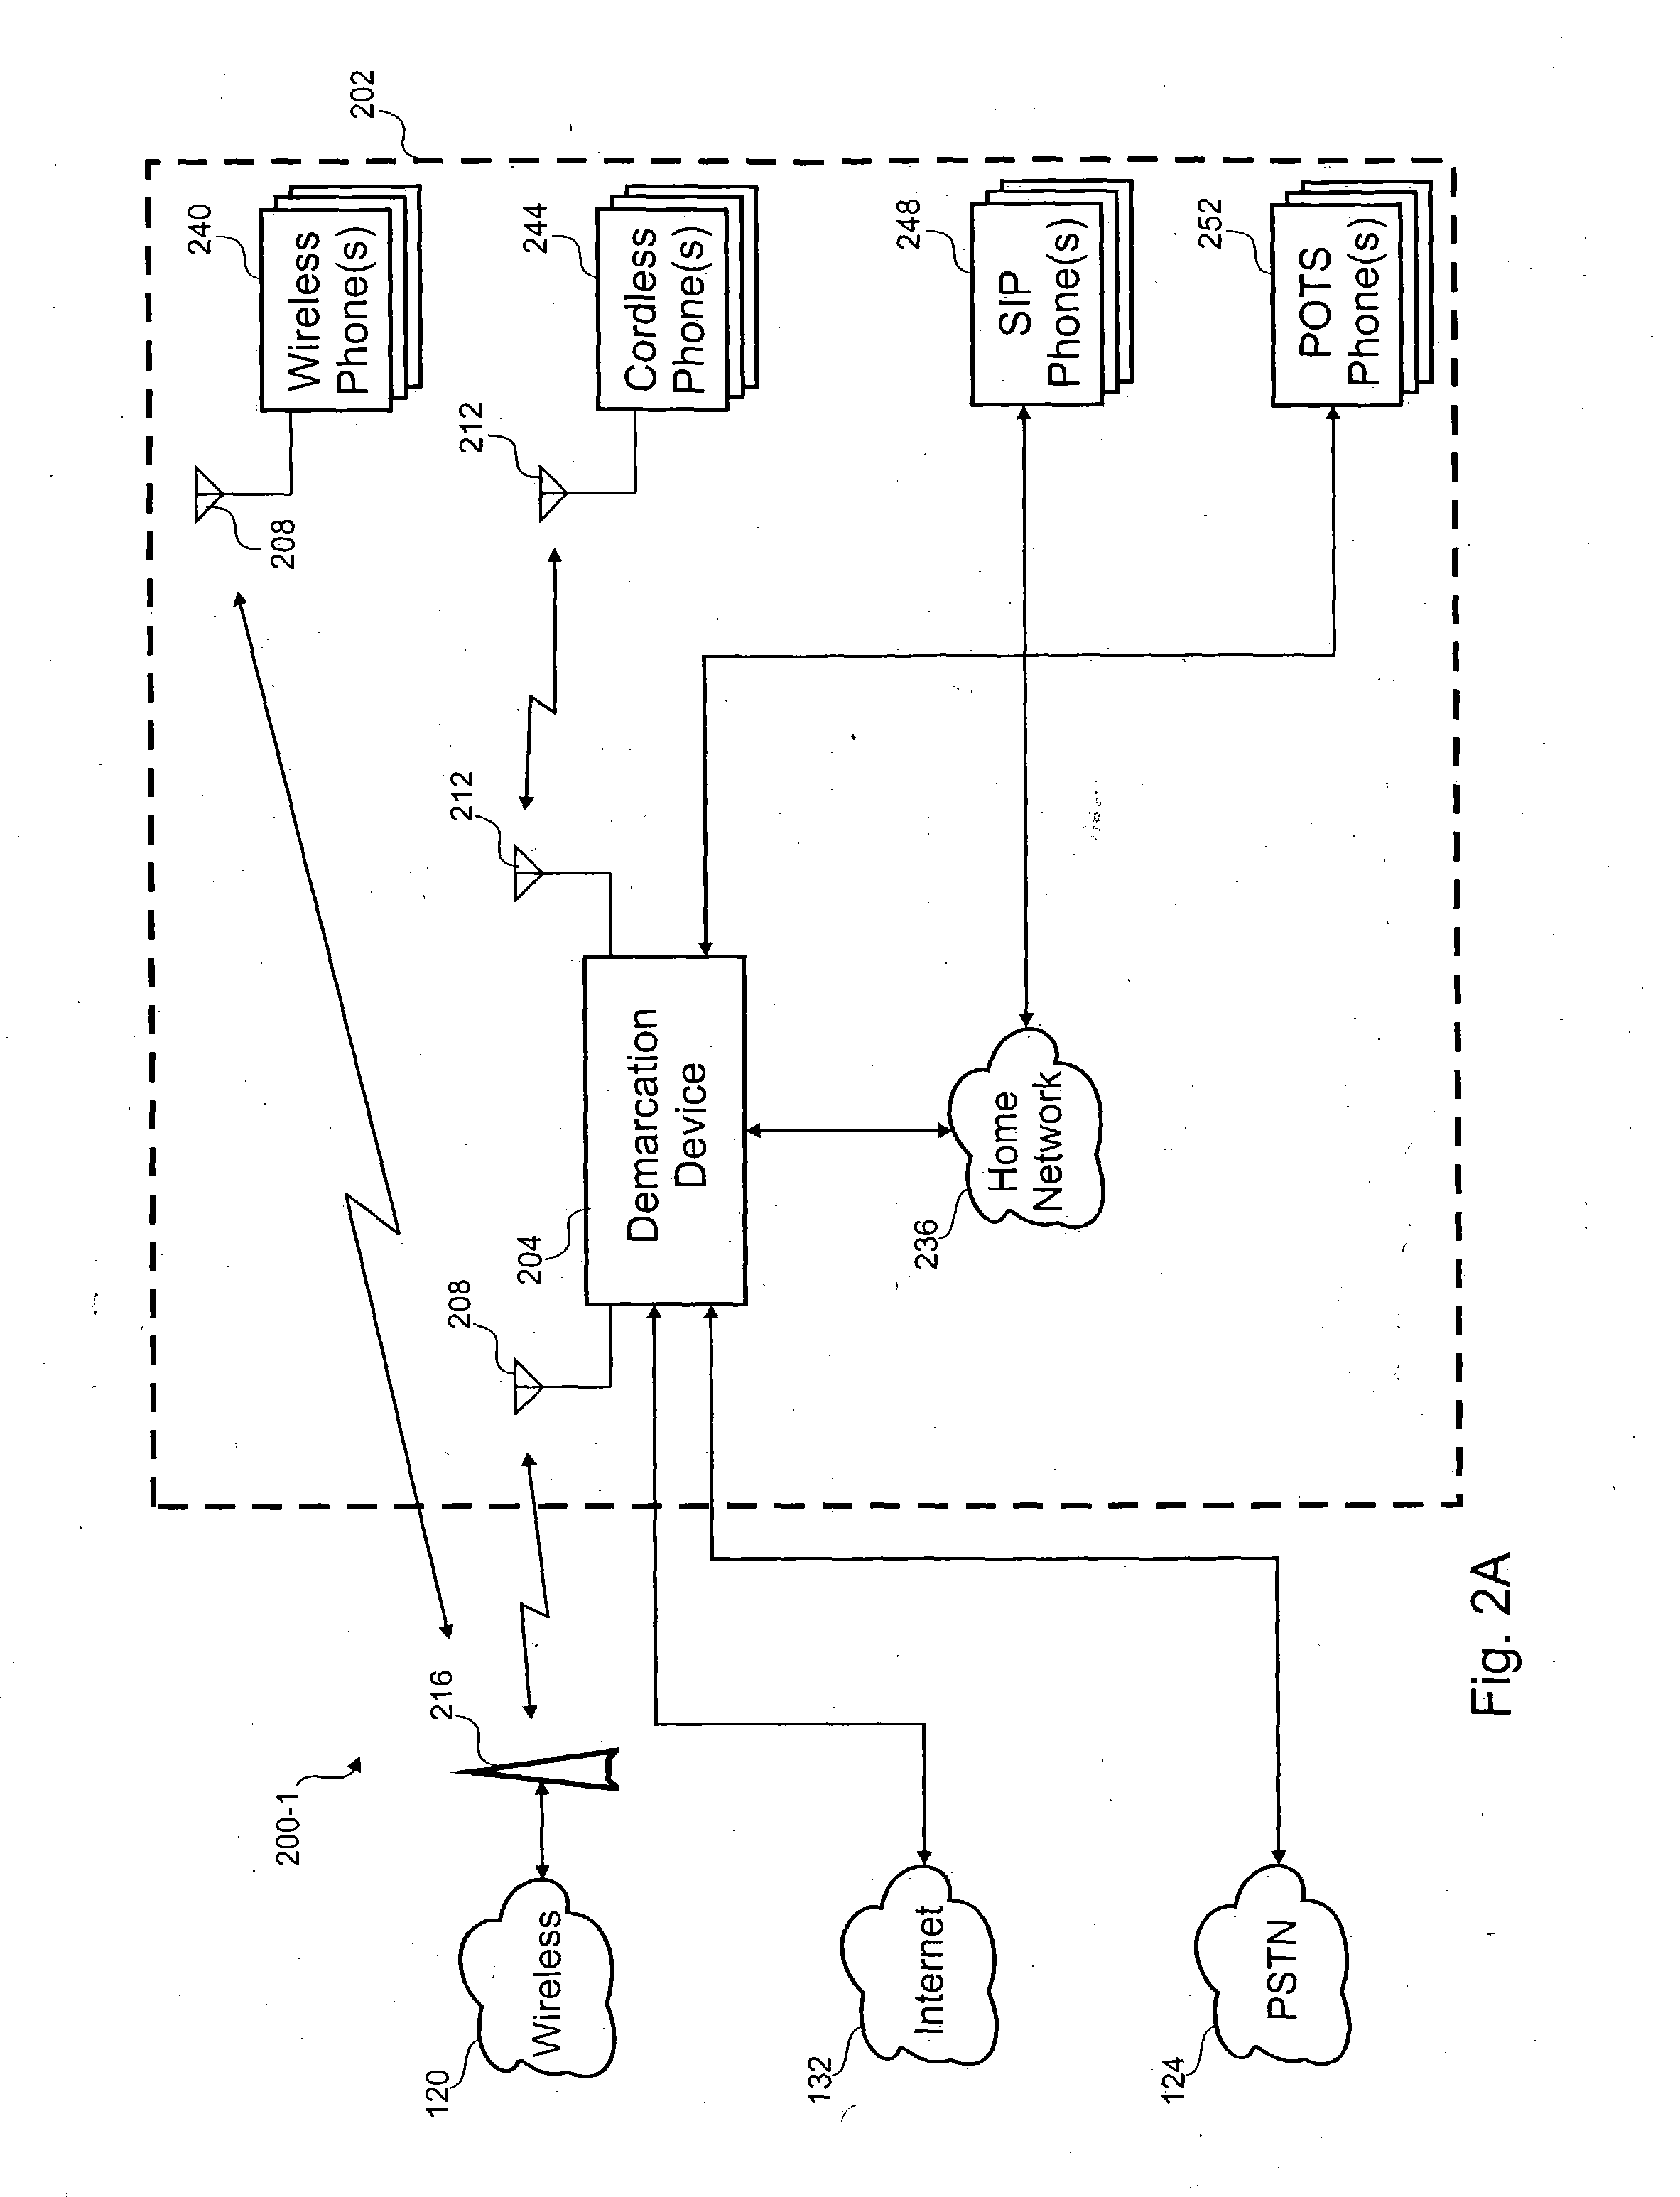 Personal communication service network interface device